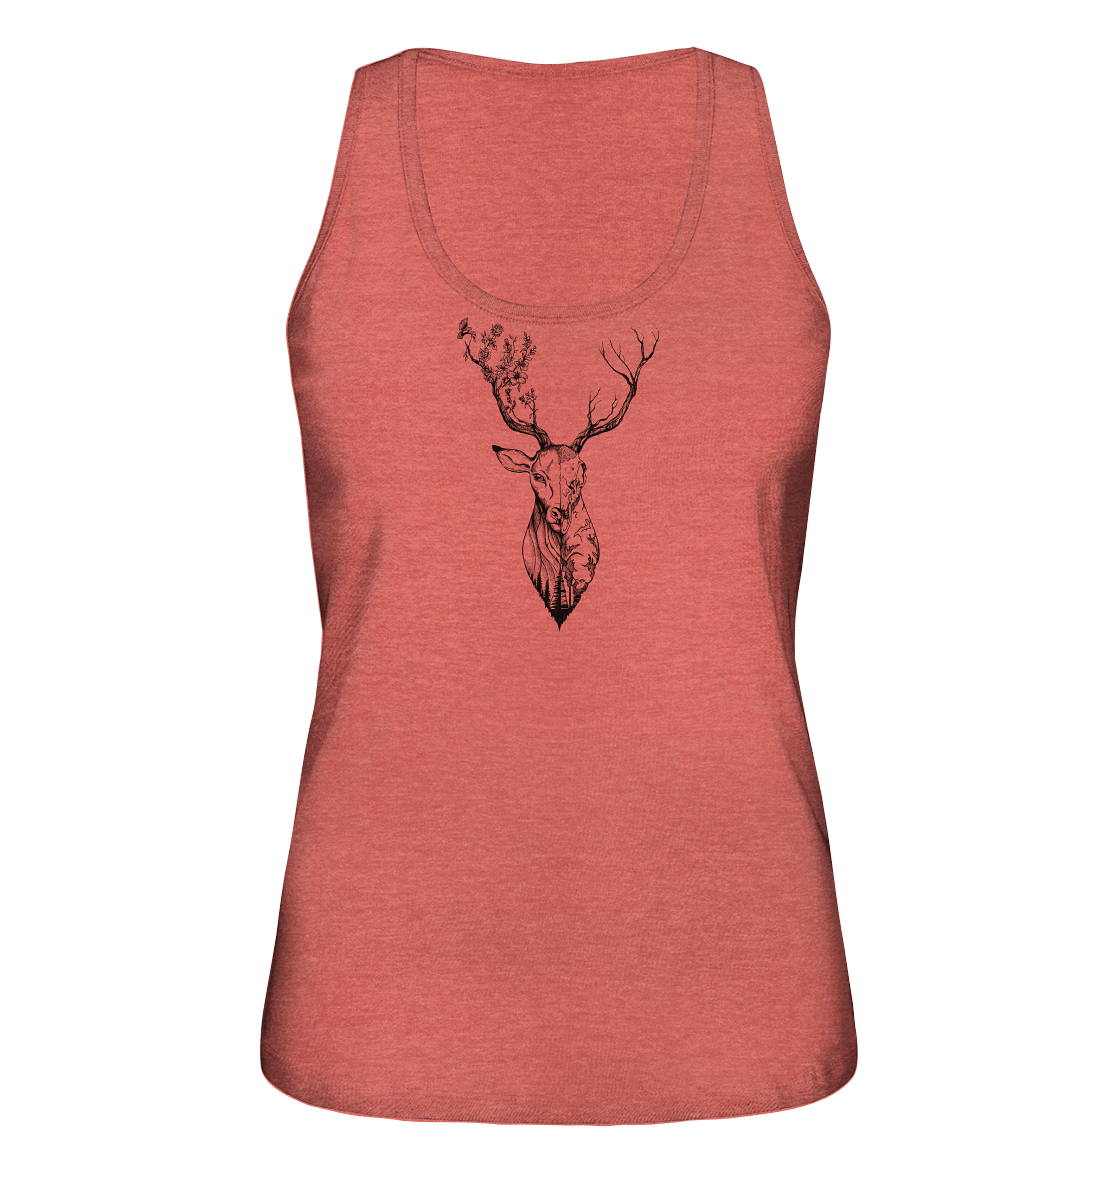 front-ladies-organic-tank-top-e05651-1116x-9.png